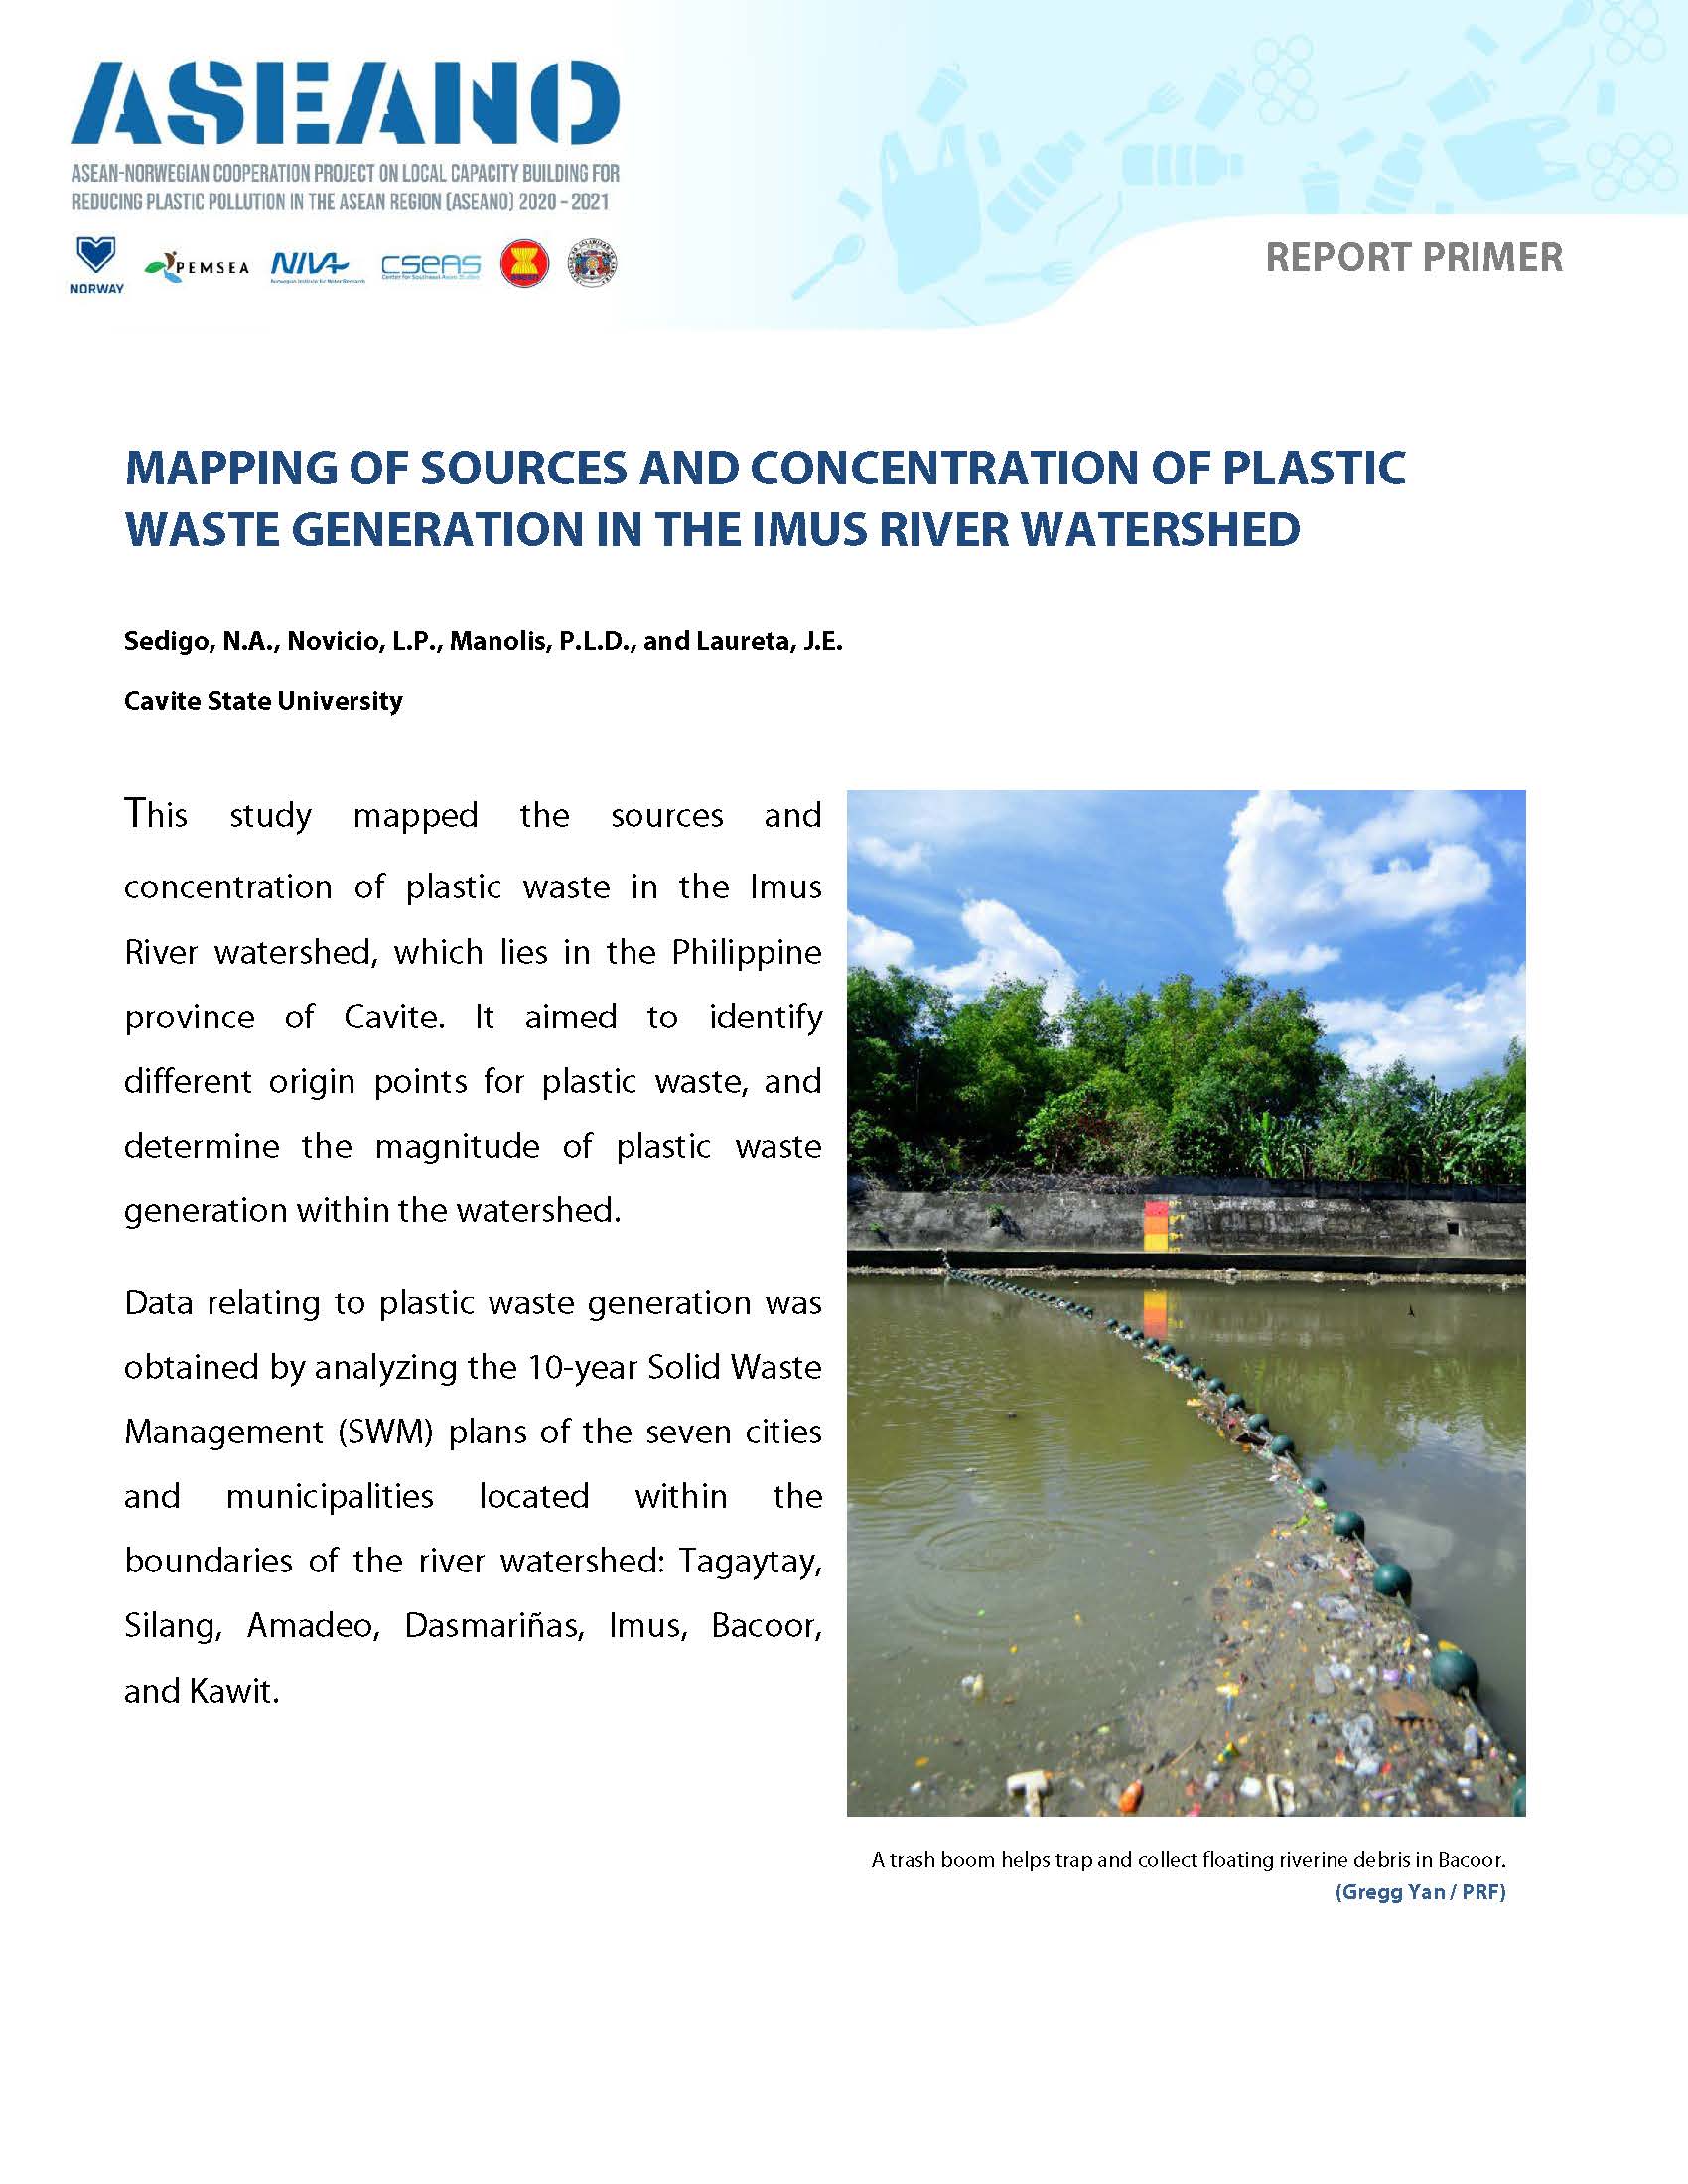 ASEANO Subproject 2 Primer - Mapping Concentrations of Plastic Waste